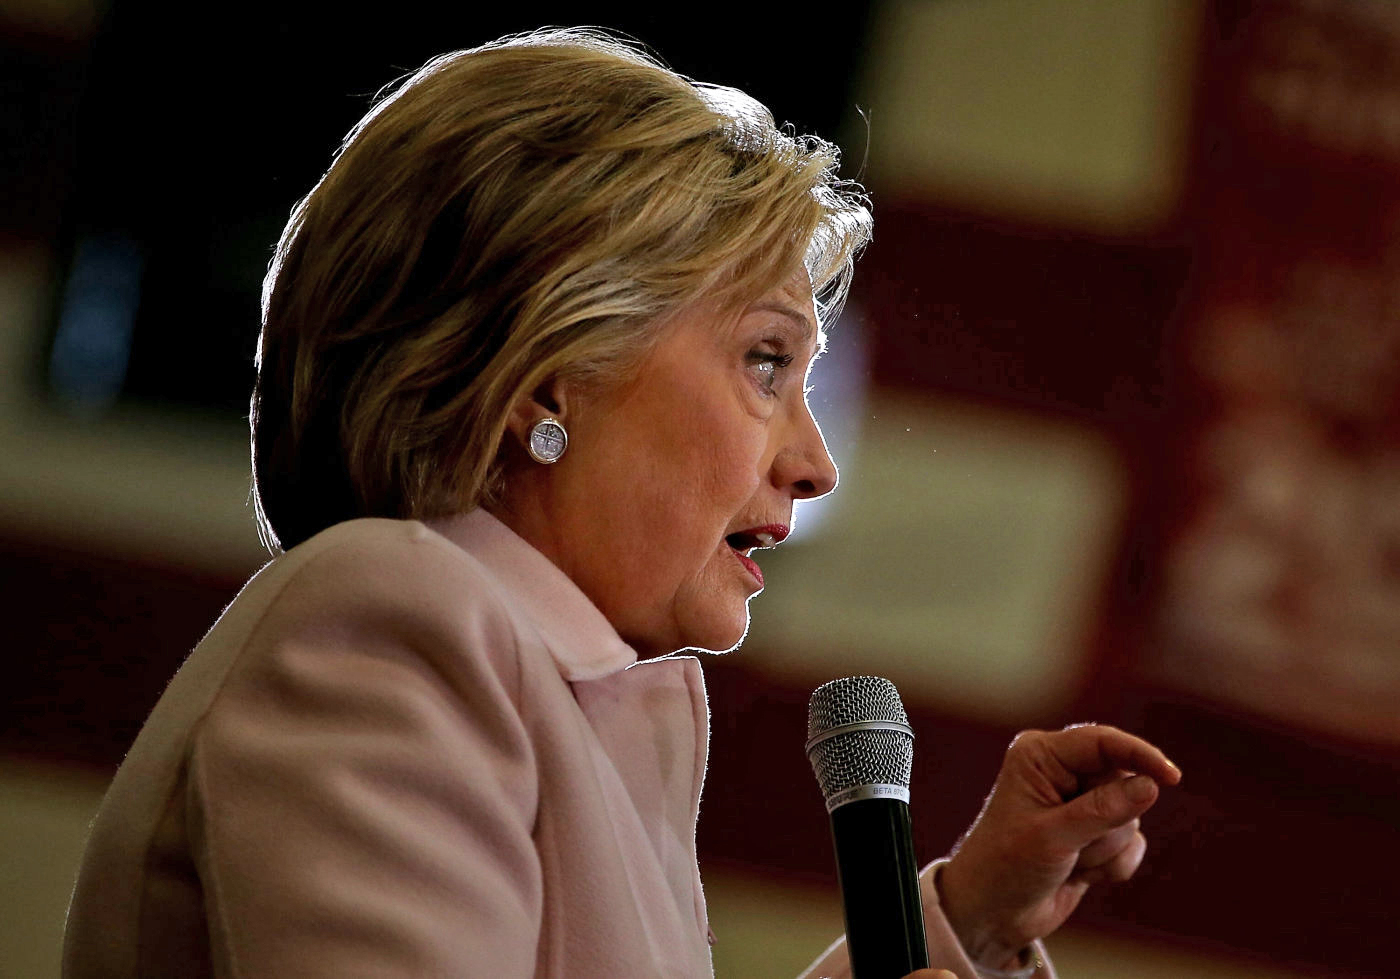 Audit shows Hillary Clinton's private emails broke federal rules